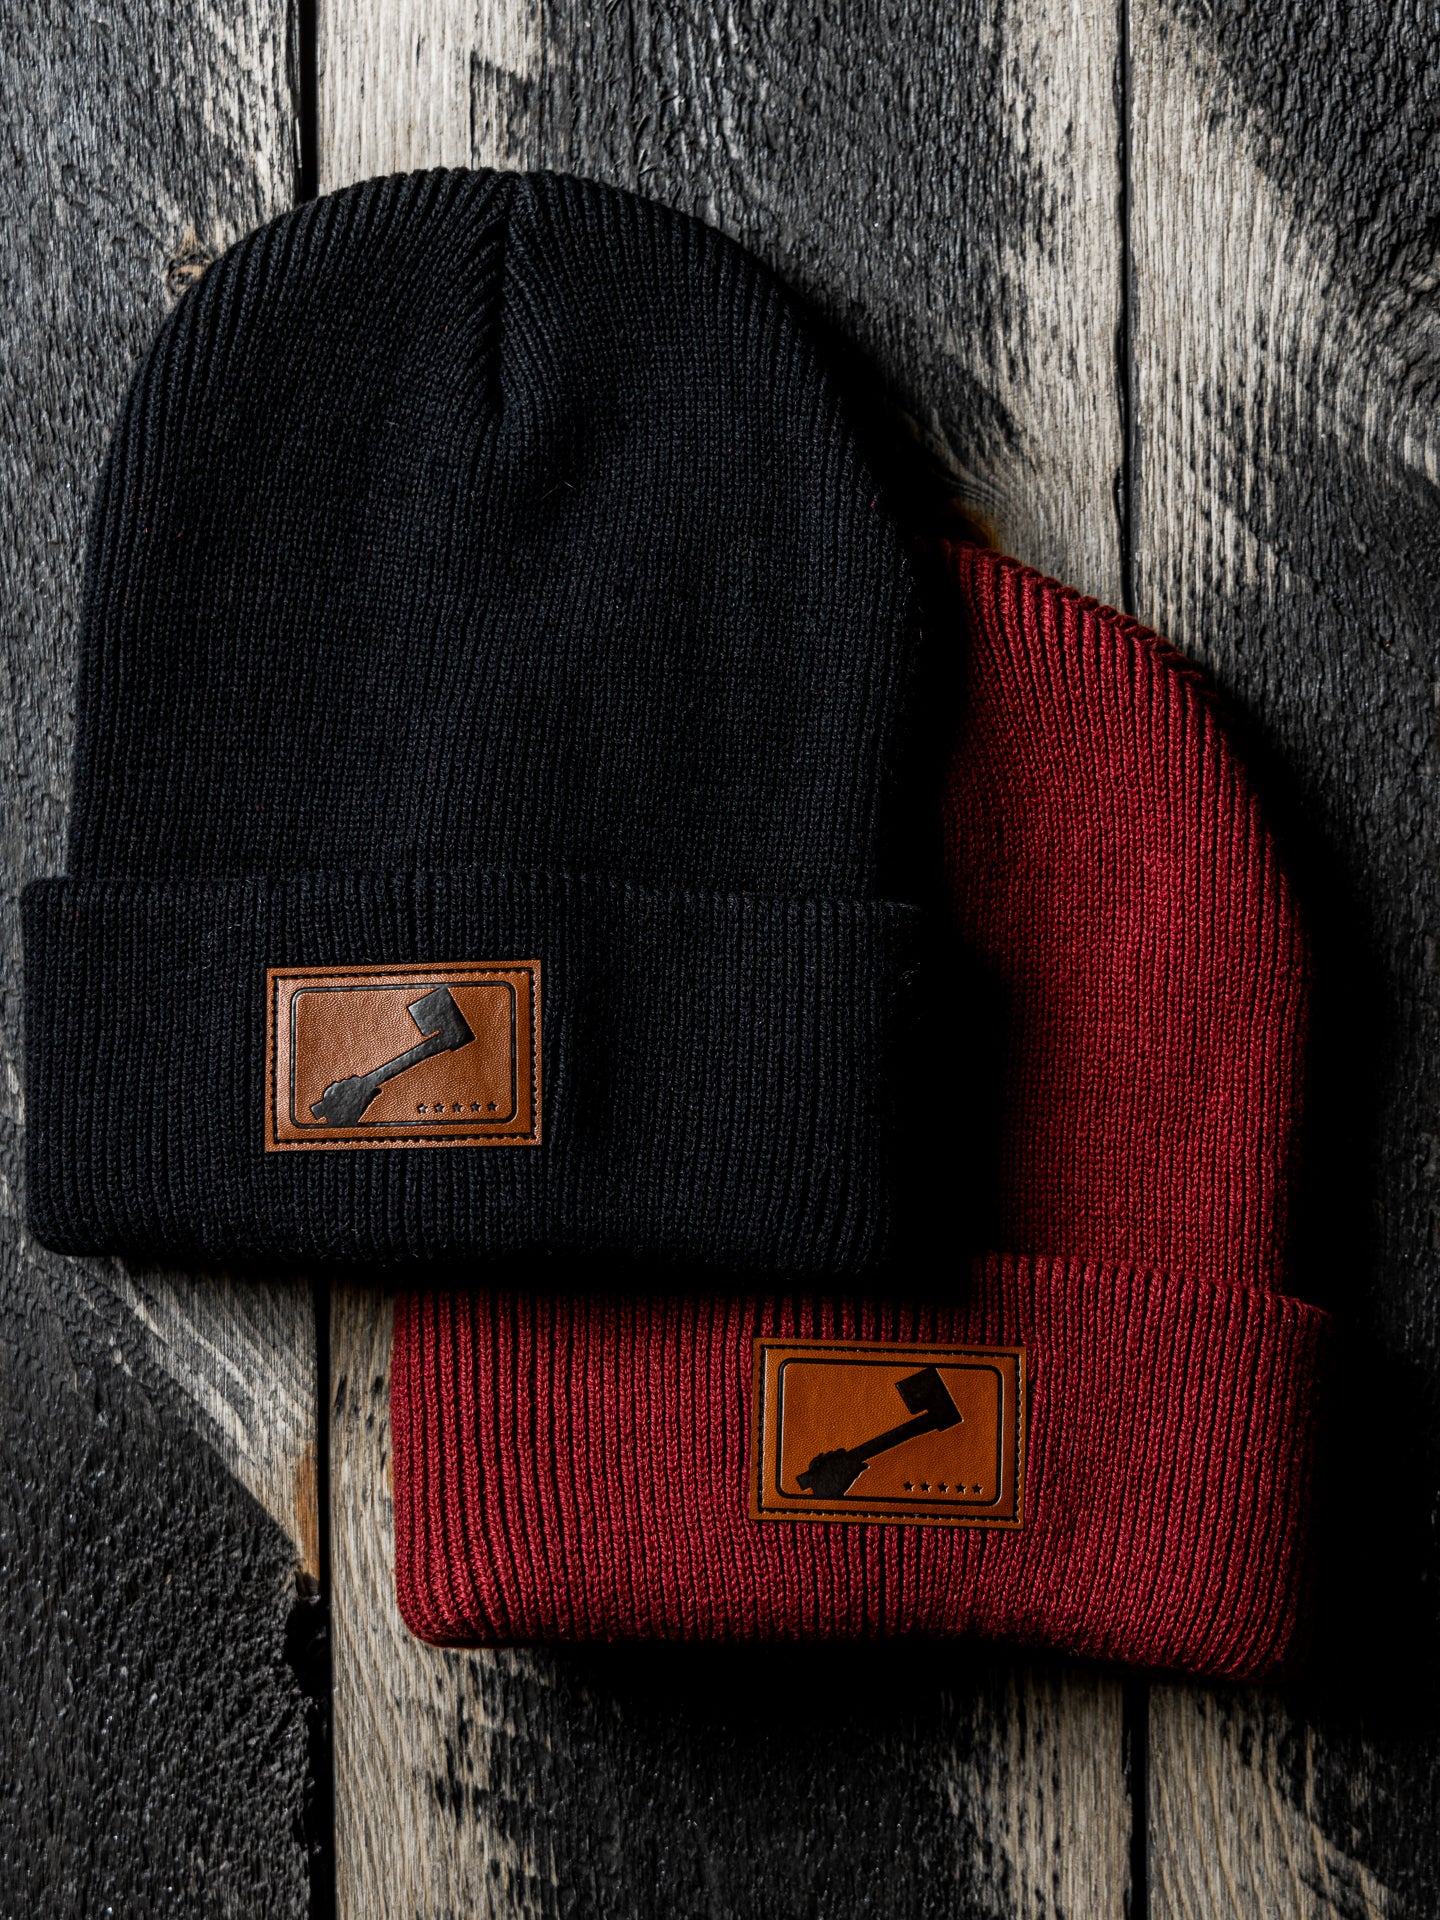 Red and Black Beanie Hat Close-Up with Leather Patch